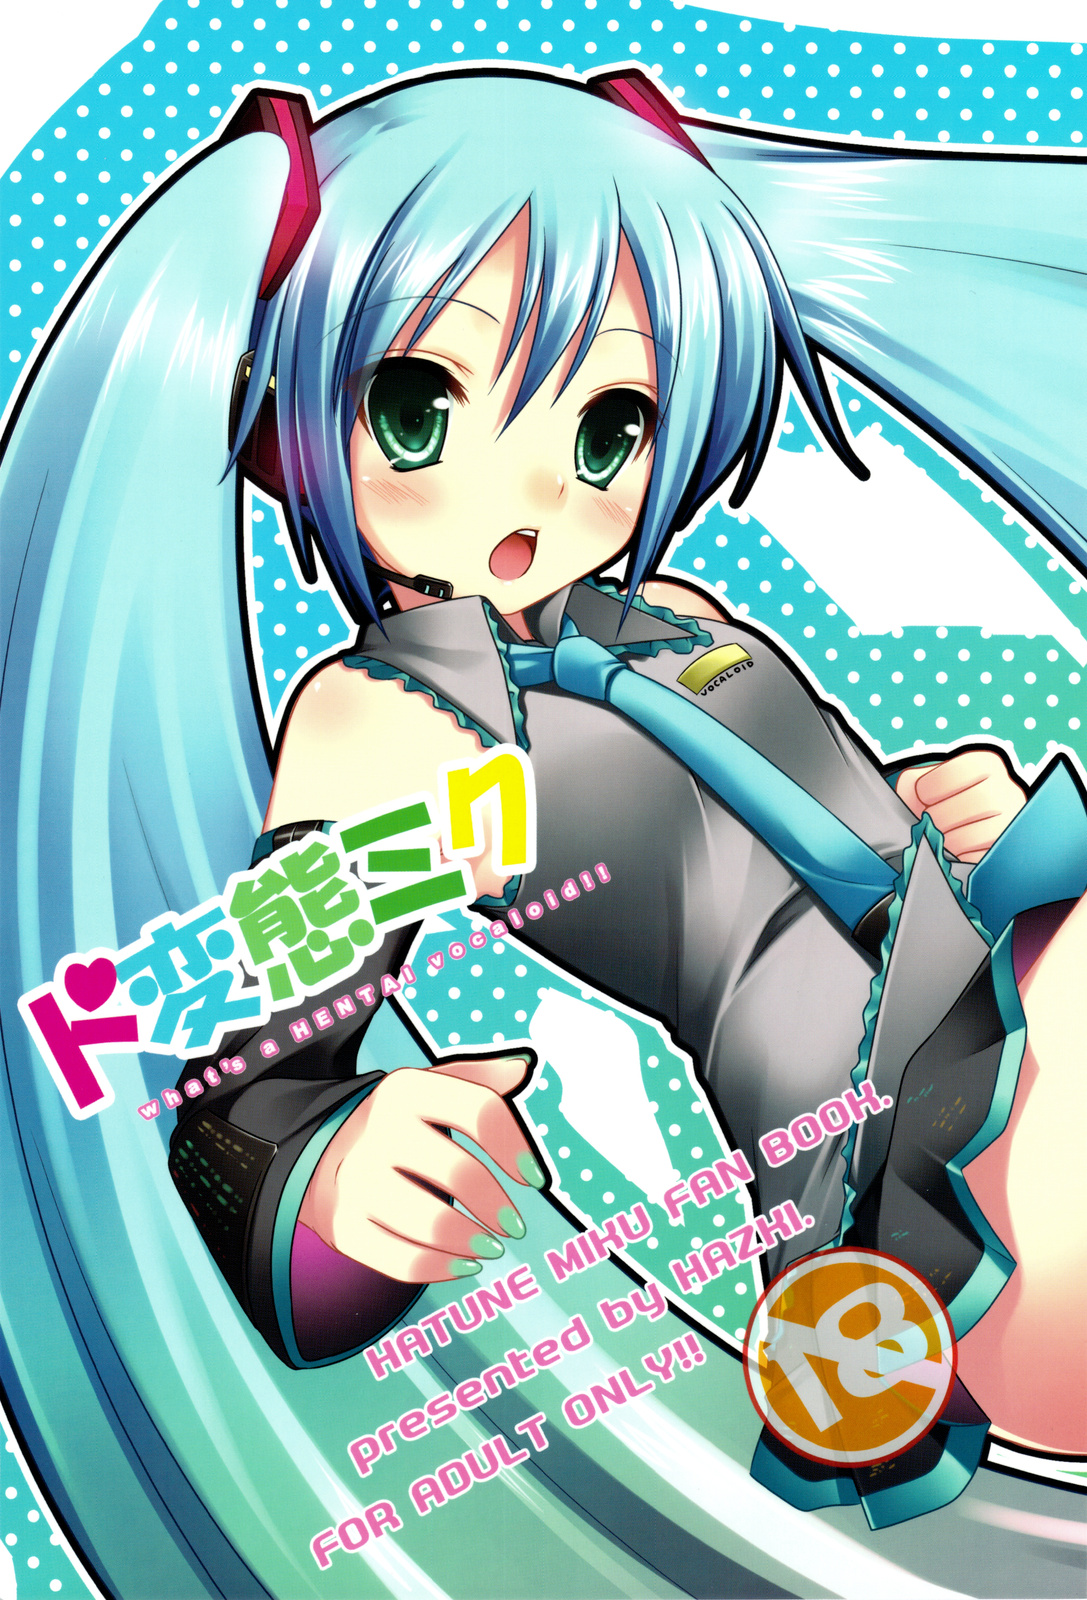 (C75) [Etcycle] Do Hentai Miku (Vocaloid) (CN) (C75) (同人誌) [ETCYCLE(はづき)] ド変態ミク (初音ミク)